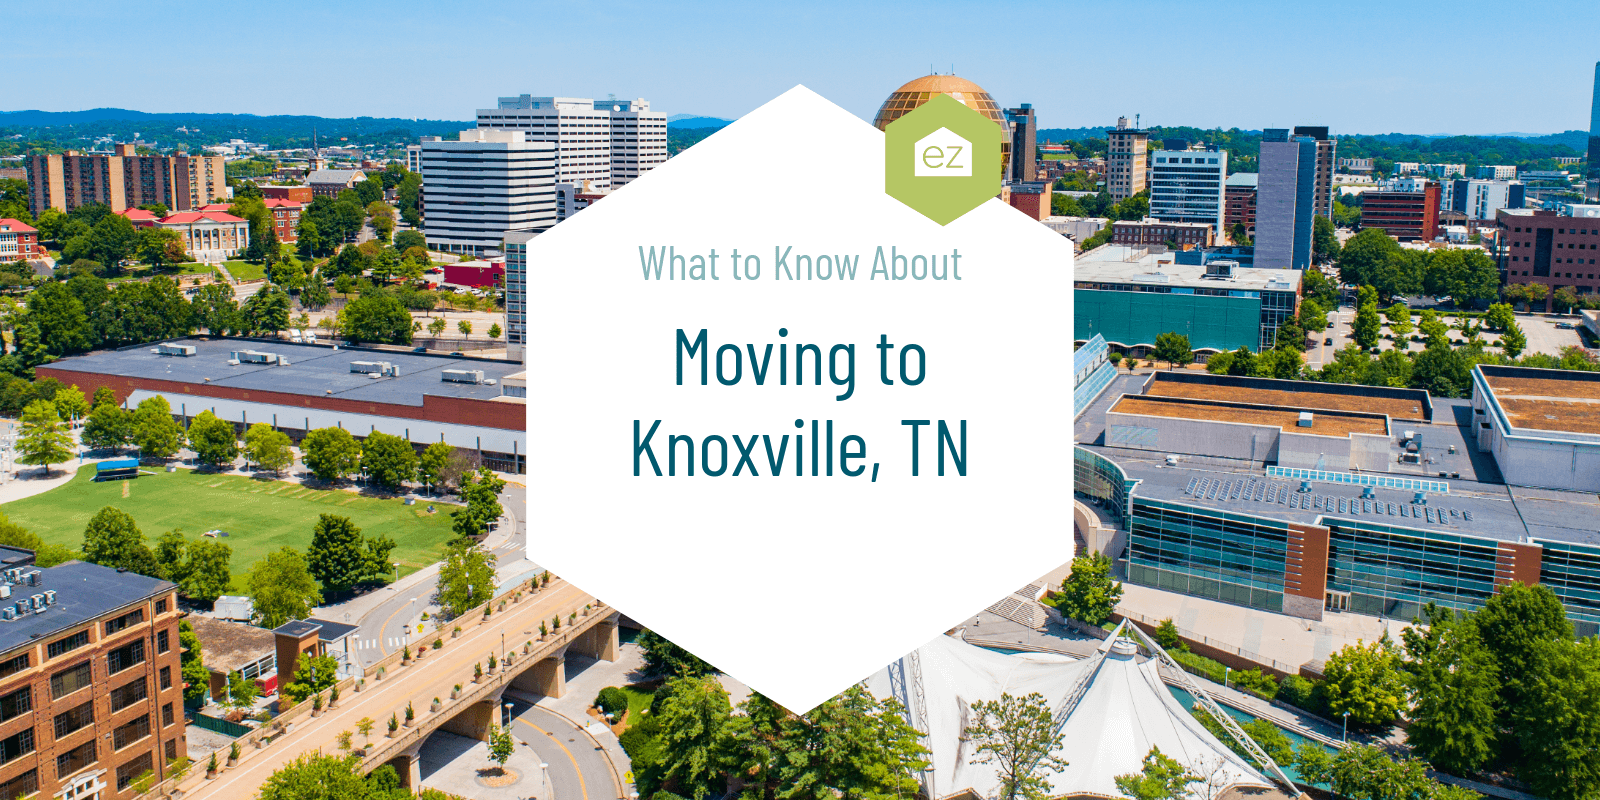 What to Know About Moving to Knoxville, TN